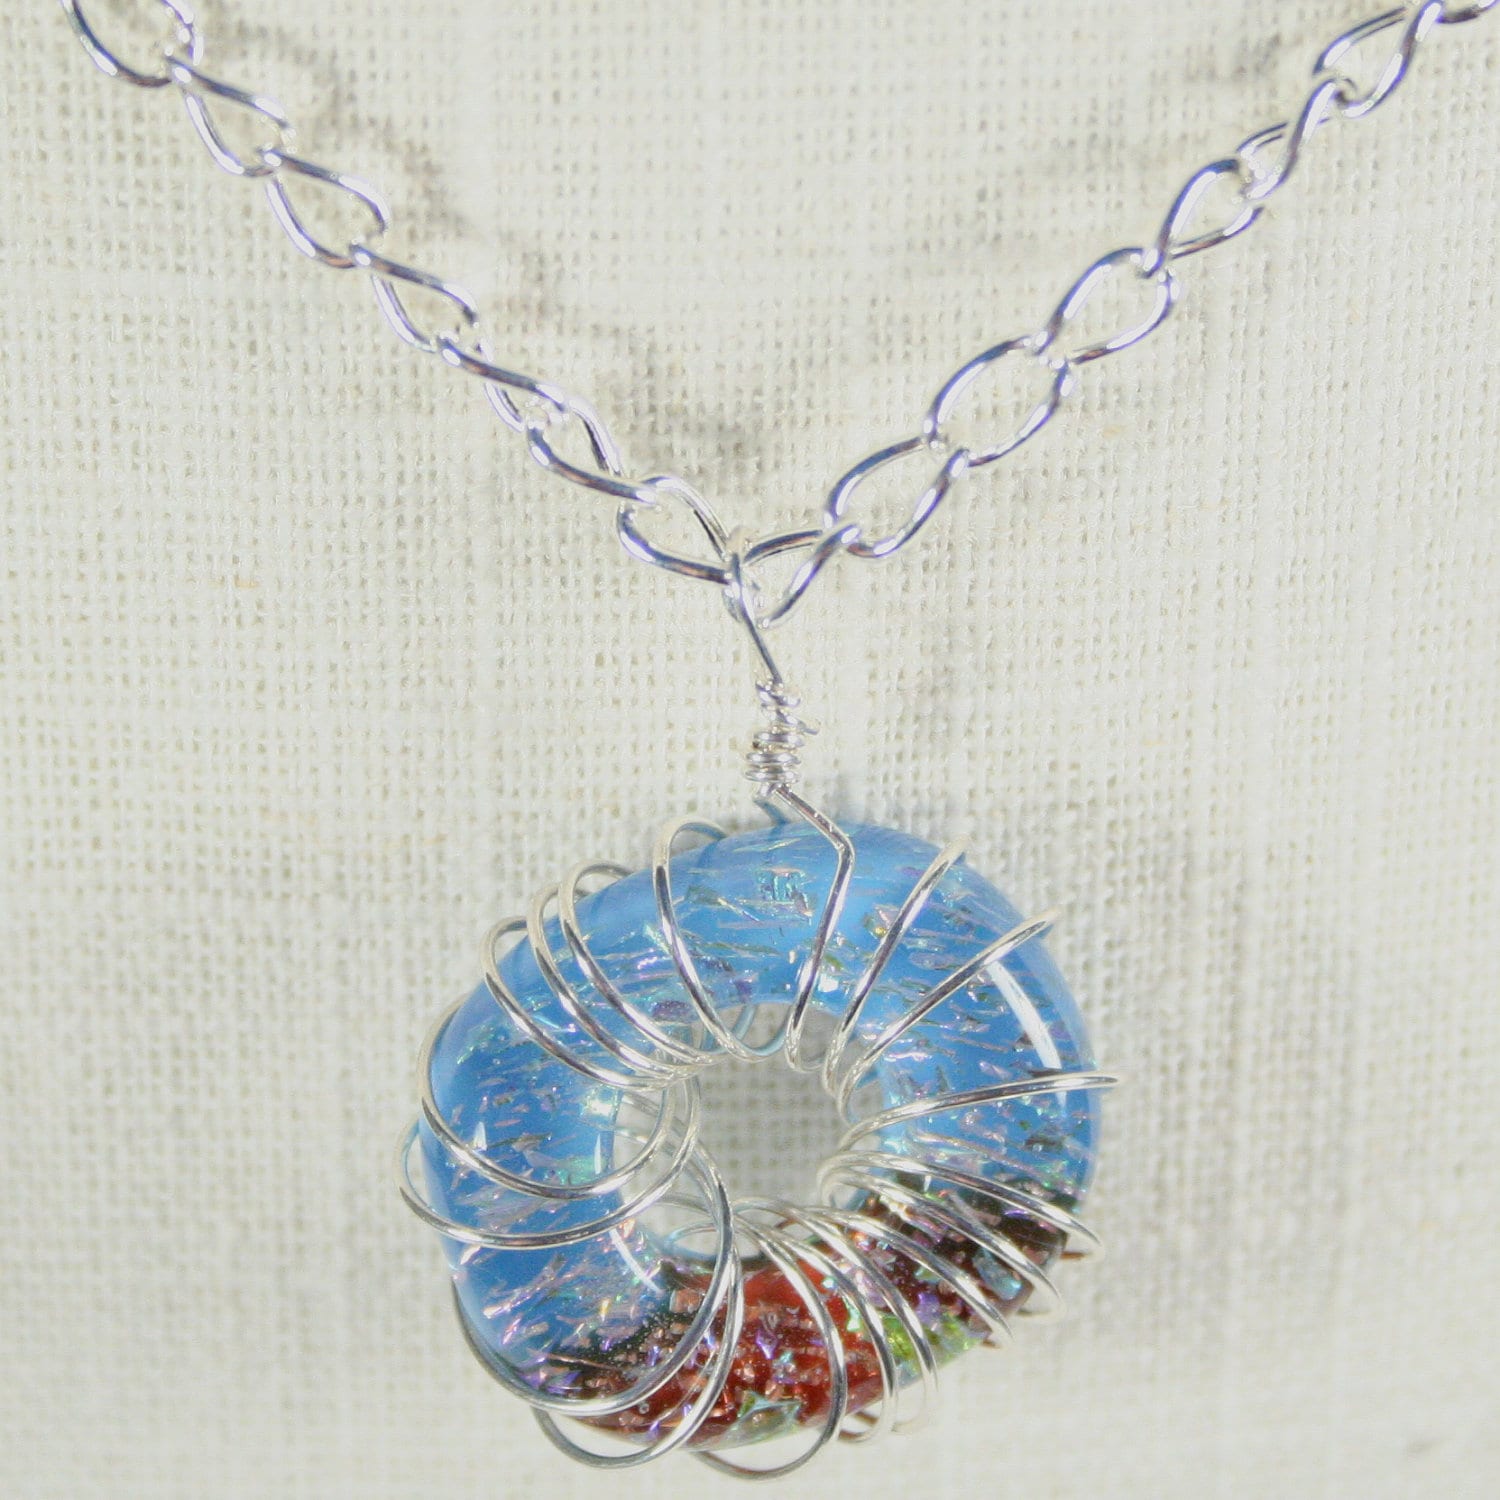 Necklace: Glass ring necklace, Blue and red necklace, wire wrapped necklace